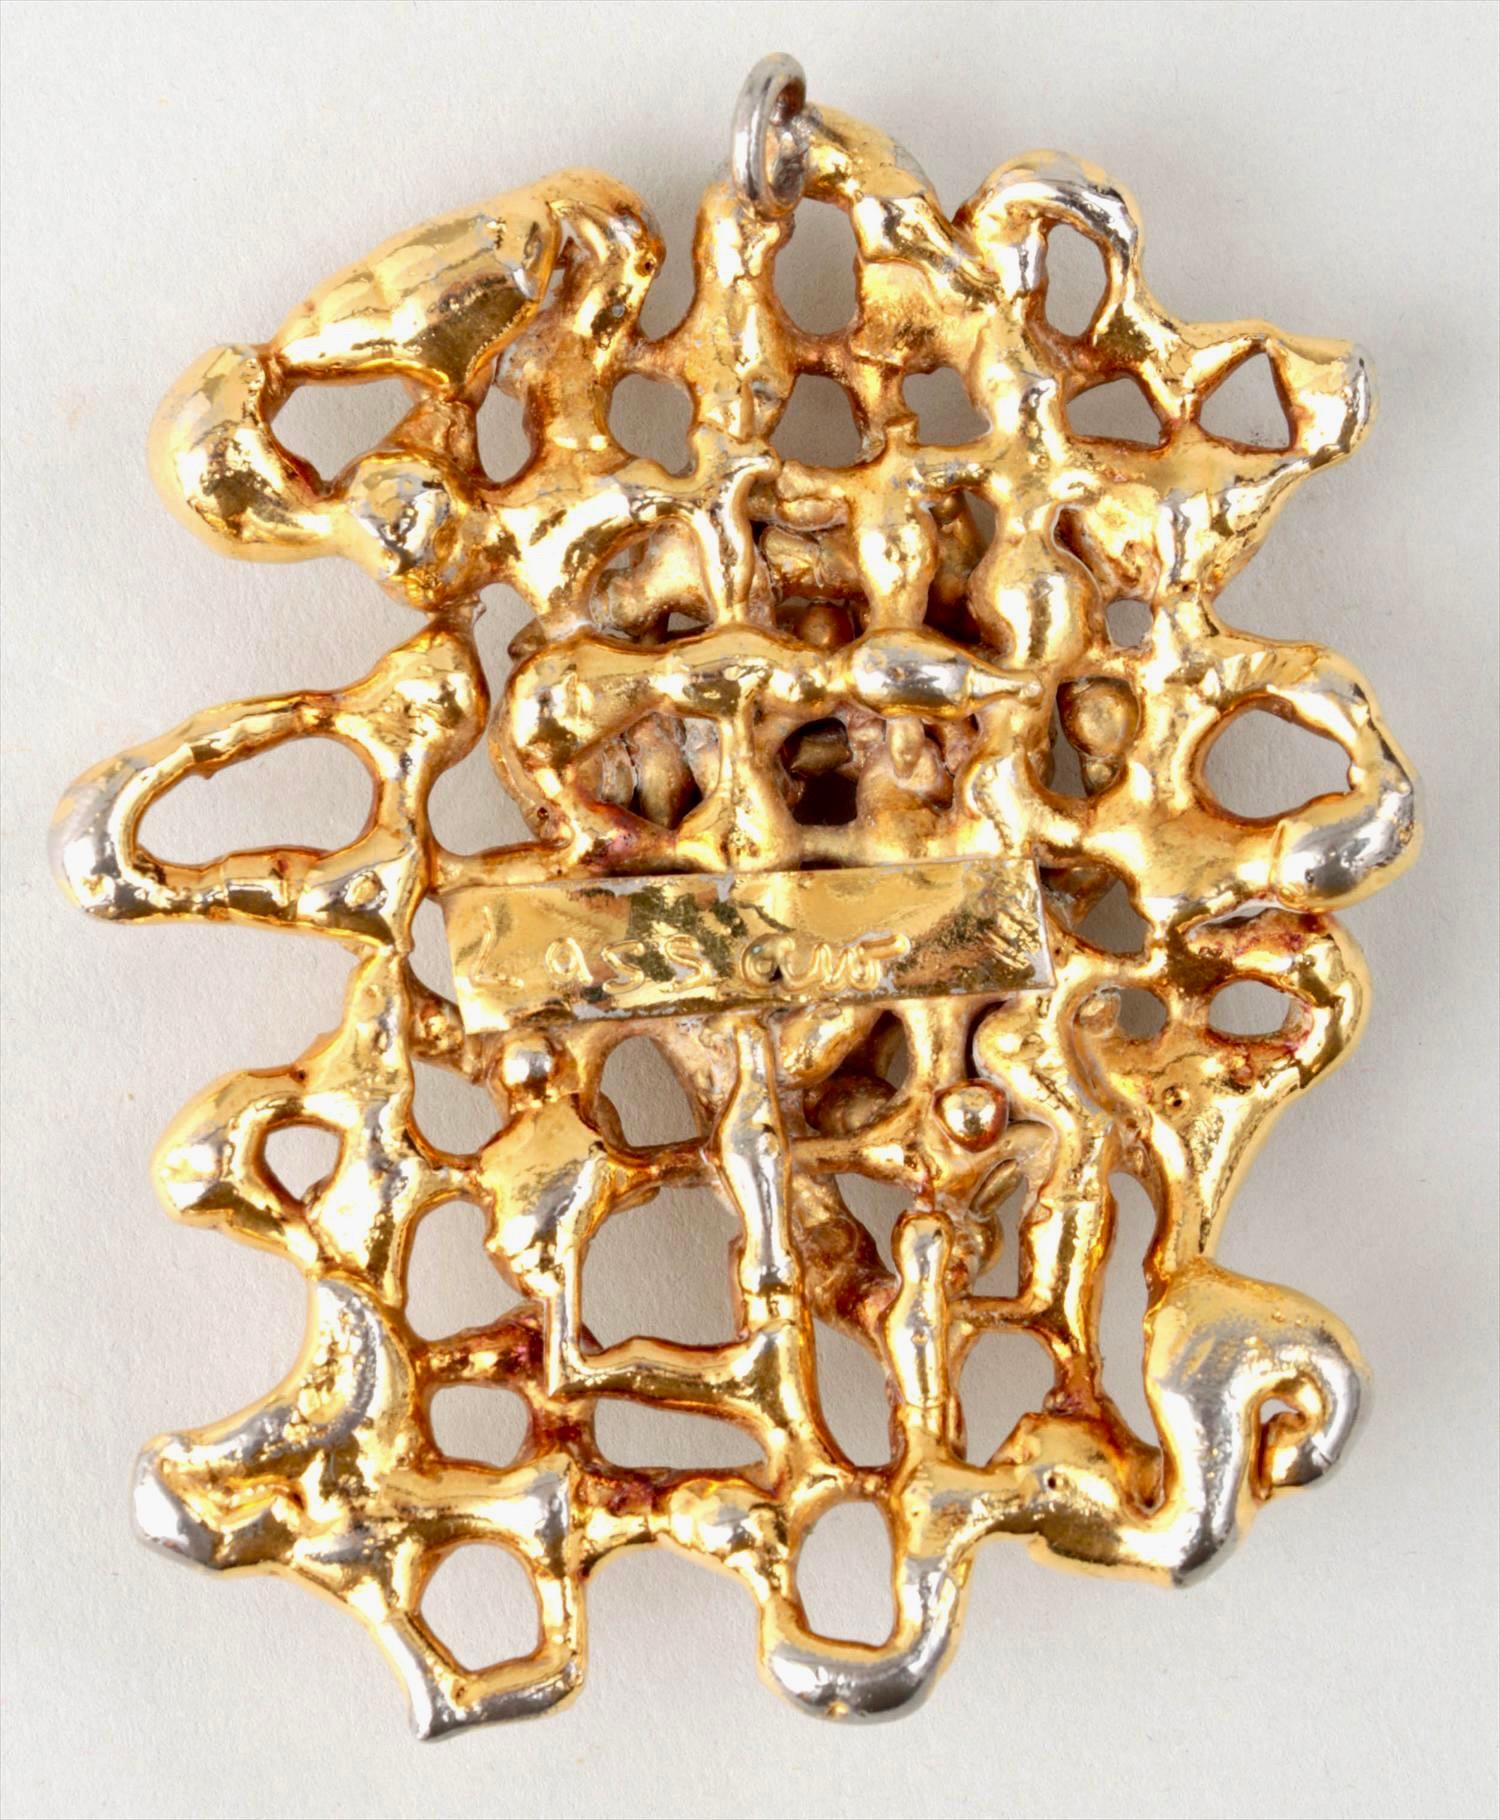 IBRAM LASSAW 
(Russian-American, 1913-2003), 
Sculptural pendant
Gold plated bronze
Signed verso
Measurements: 2-7/8''h, 2-1/4''w.

Ibram Lassaw was born in Alexandria, Egypt, of Russian Jewish émigré parents. After briefly living in Marseille,